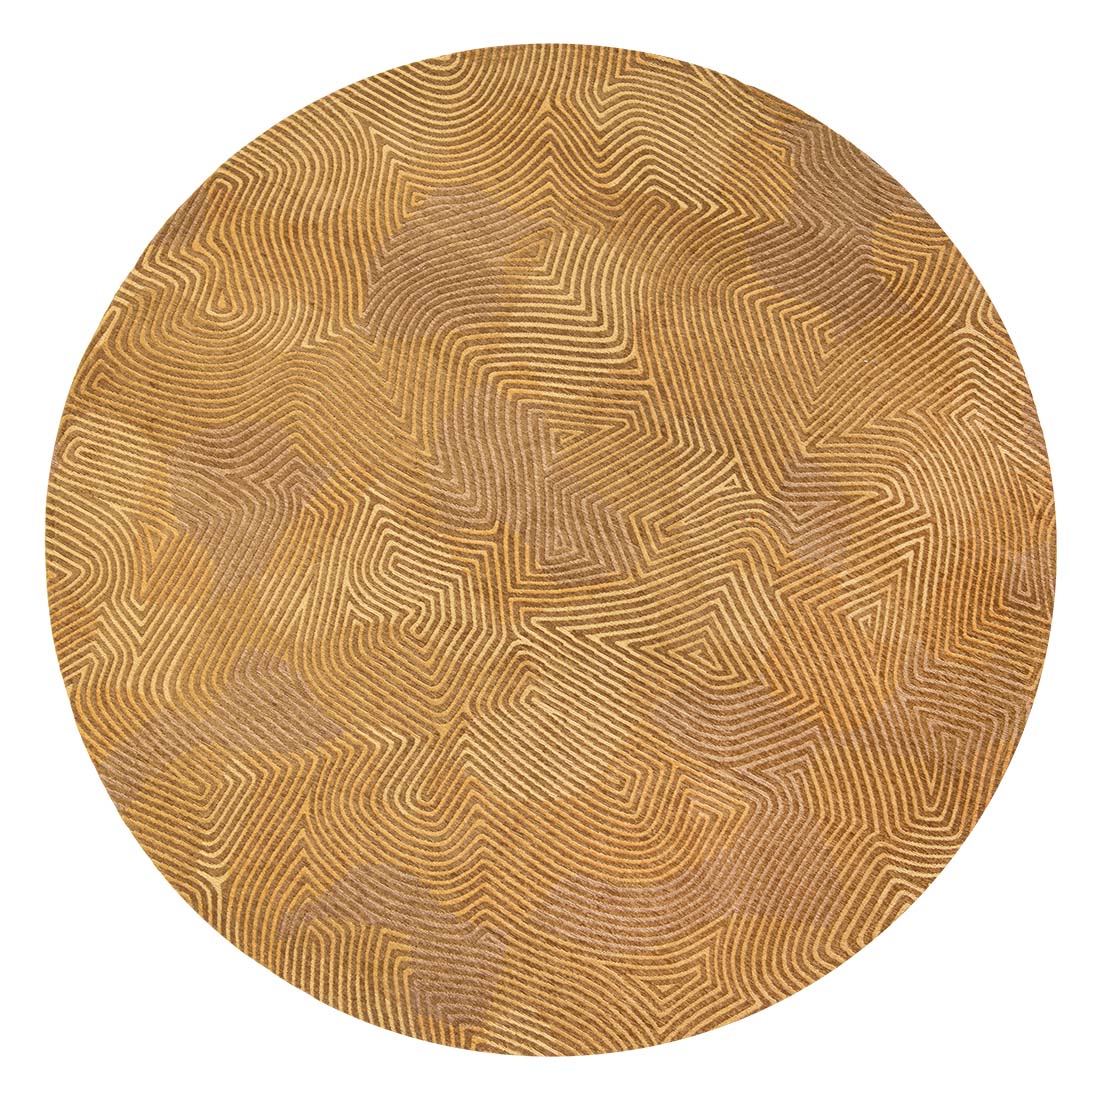 gold flatweave area rug with organic, textured pattern
